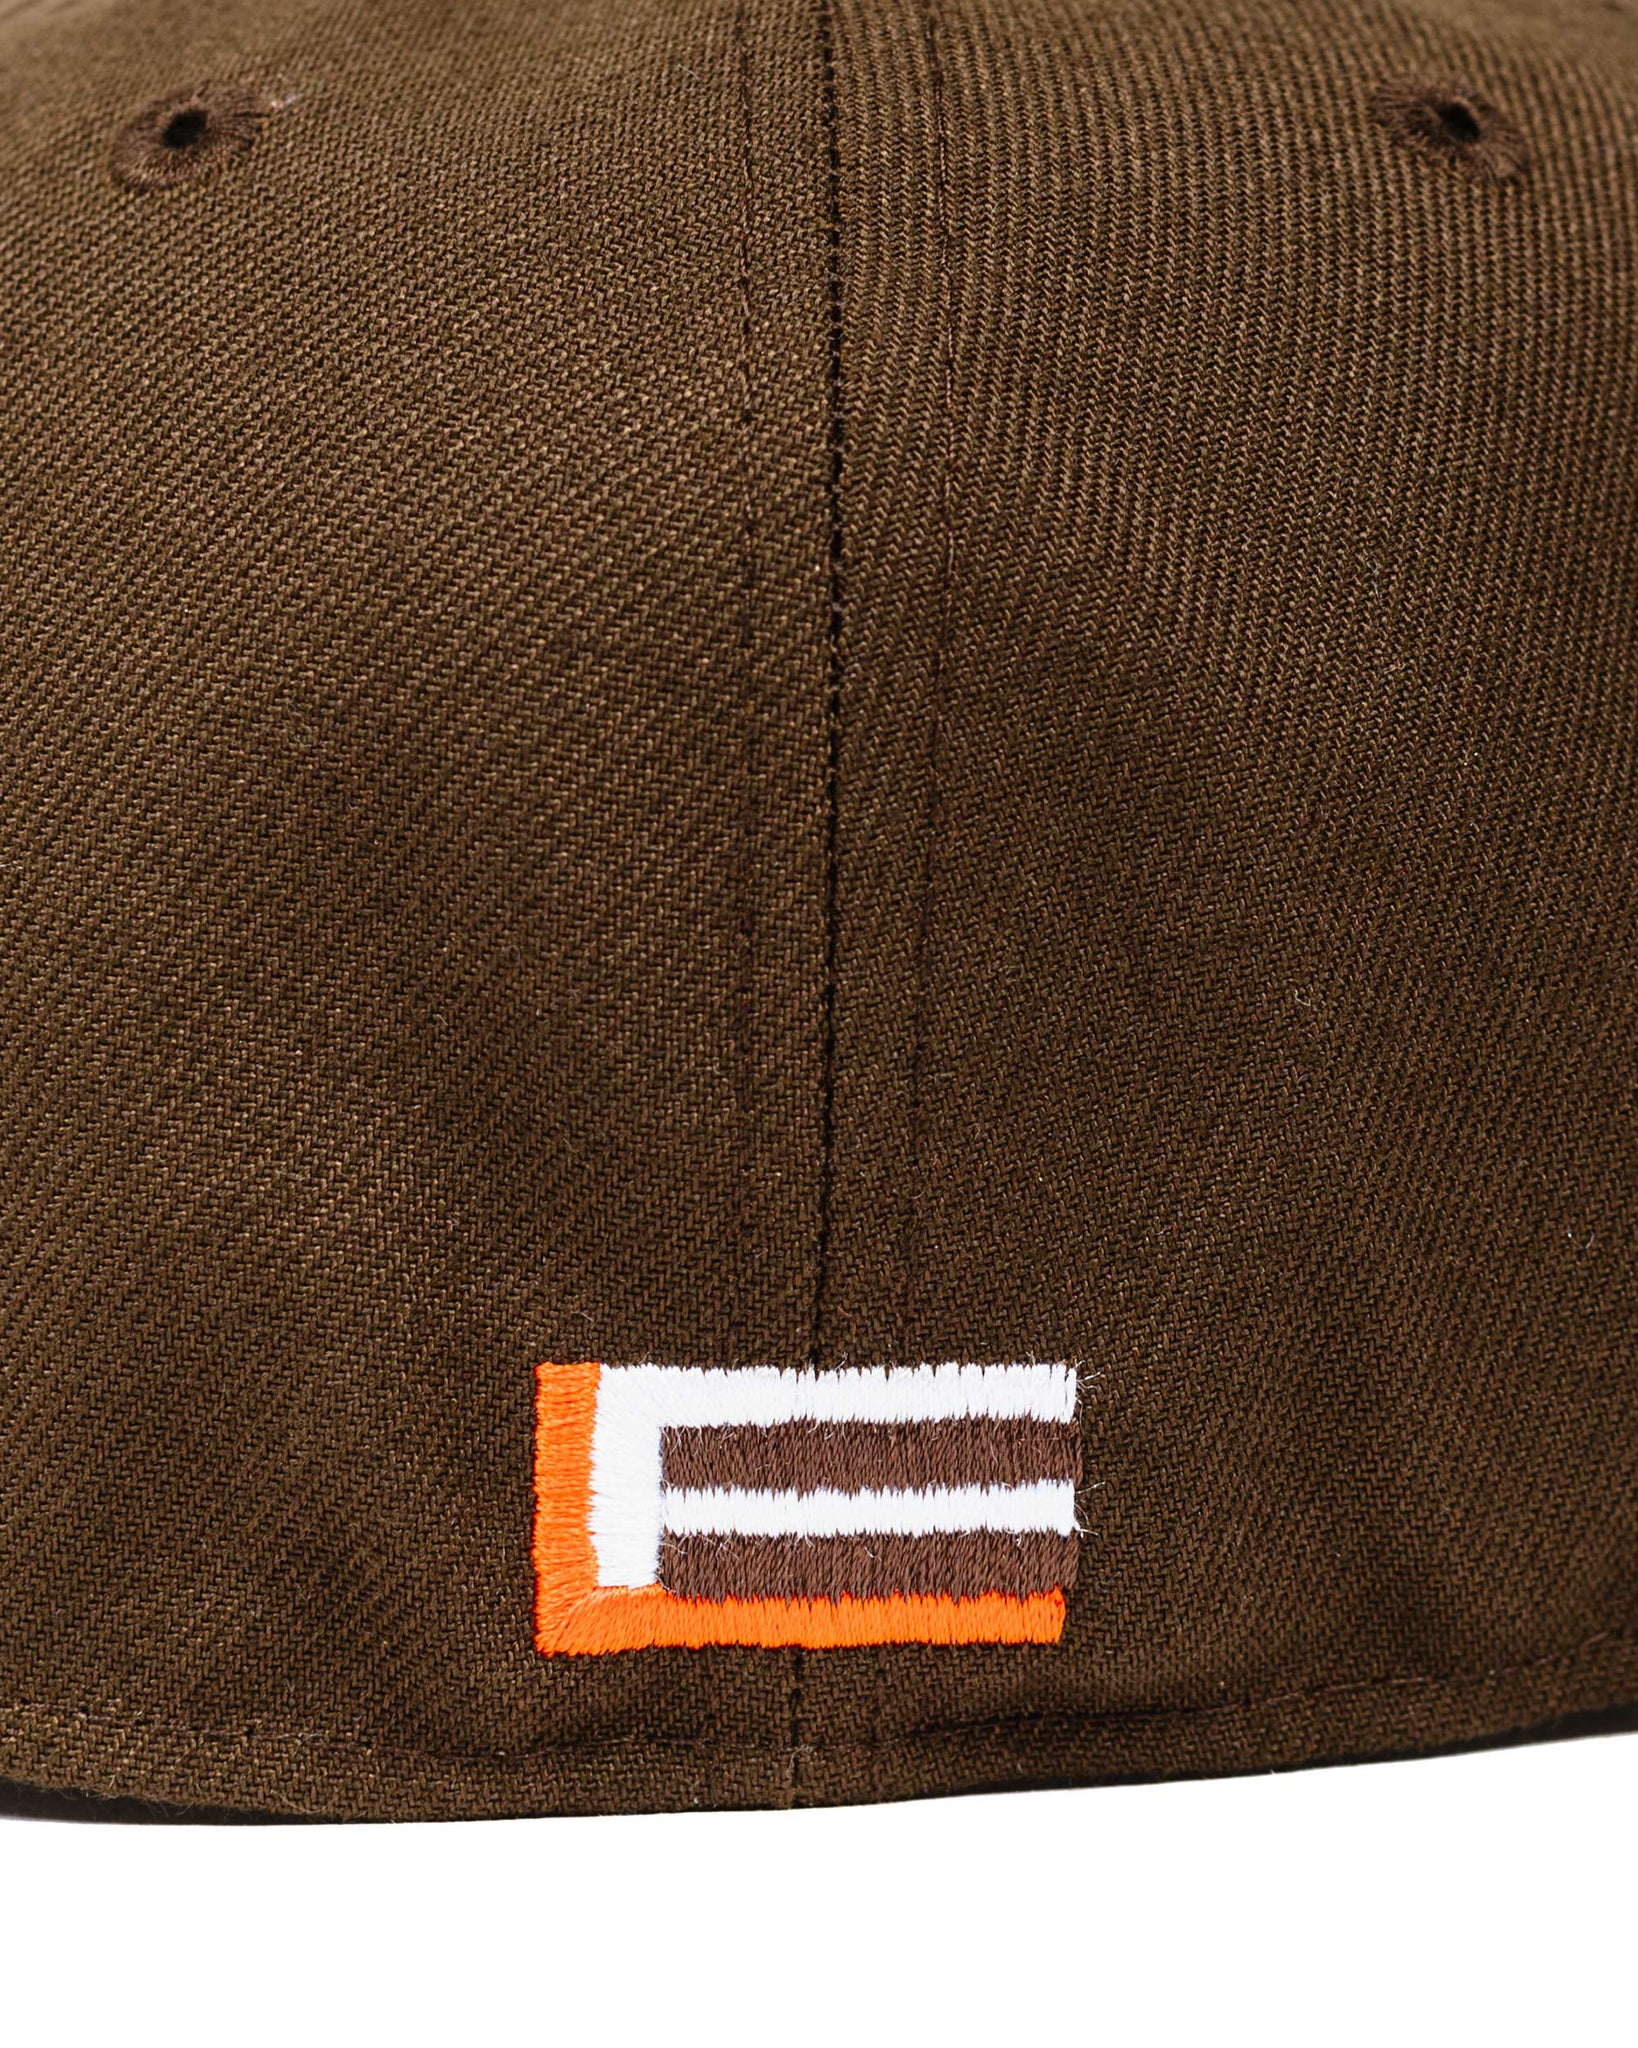 Lost & Found x New Era Low Profile 59FIFTY Cap Brown Back Logo